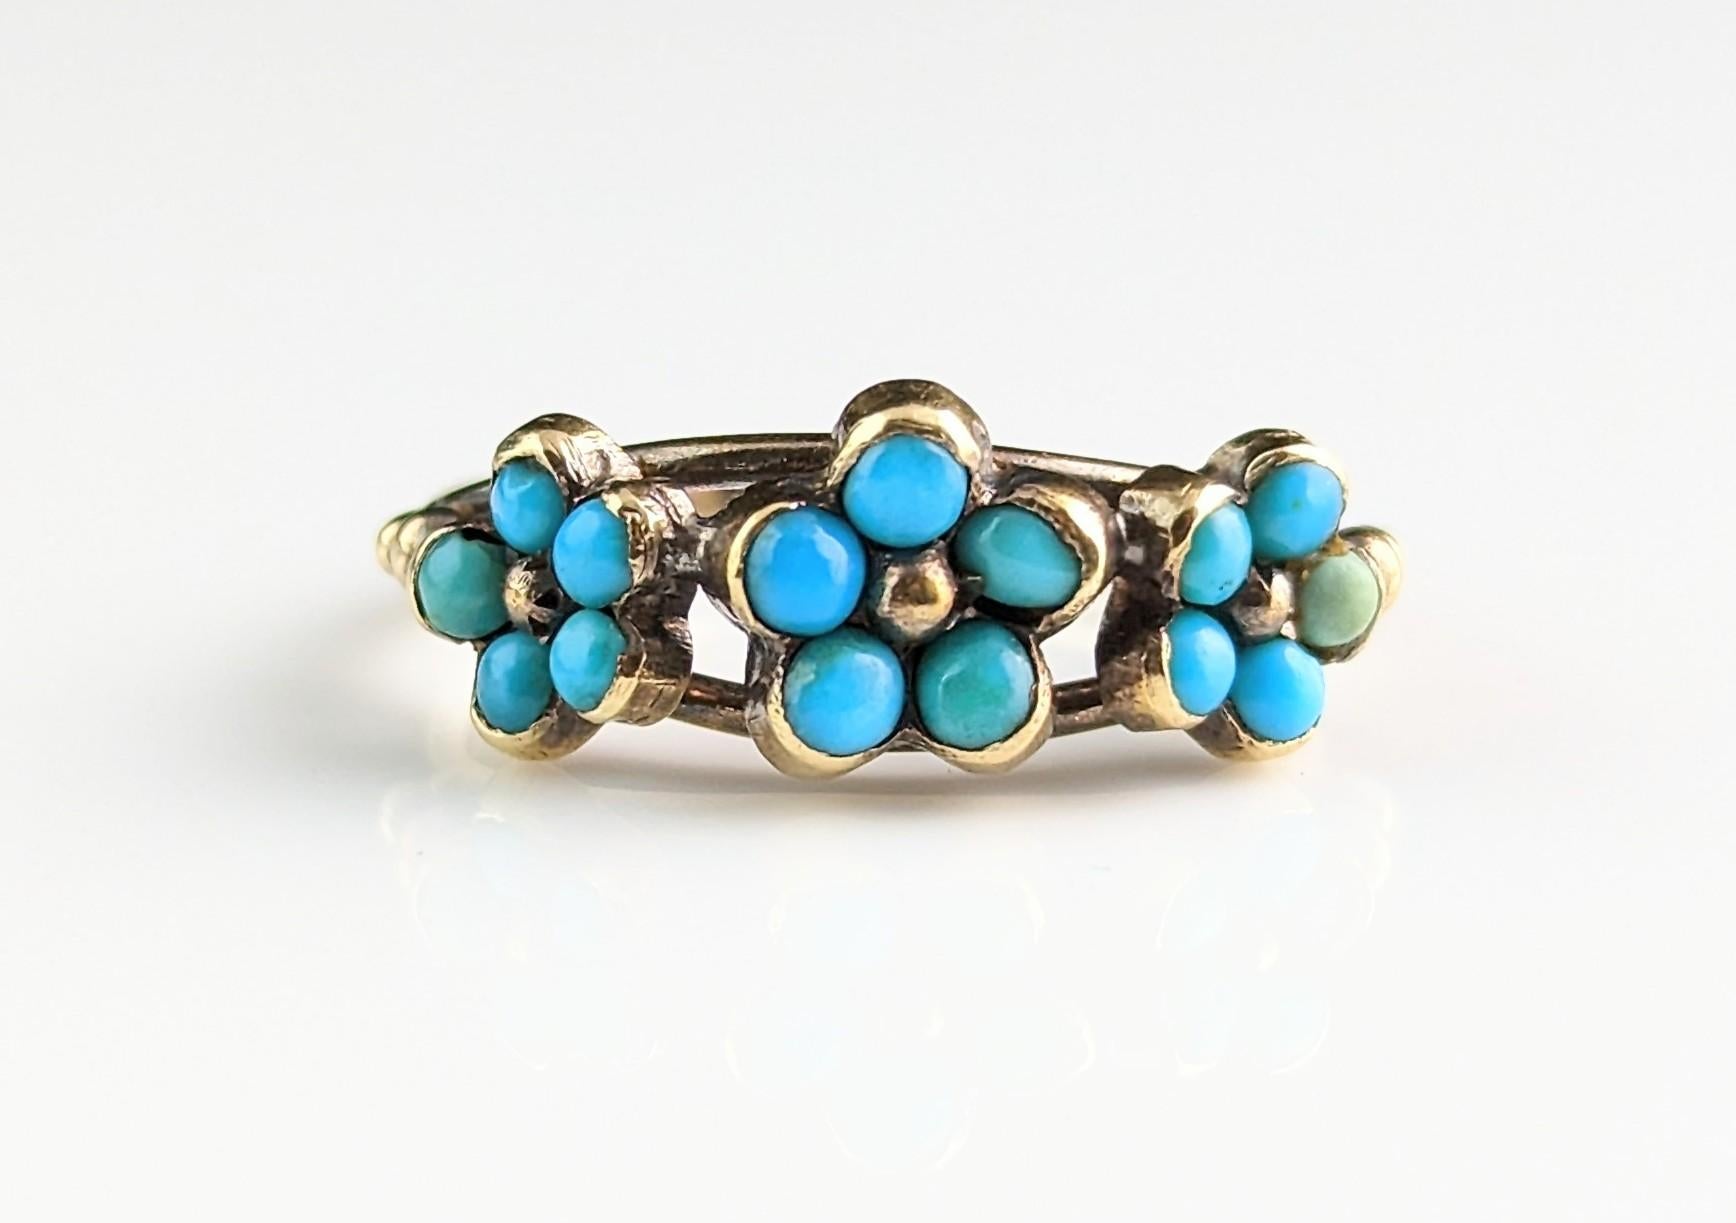 Antique Georgian Triple Flower Ring, Forget Me Not, 18k Gold and Turquoise 13